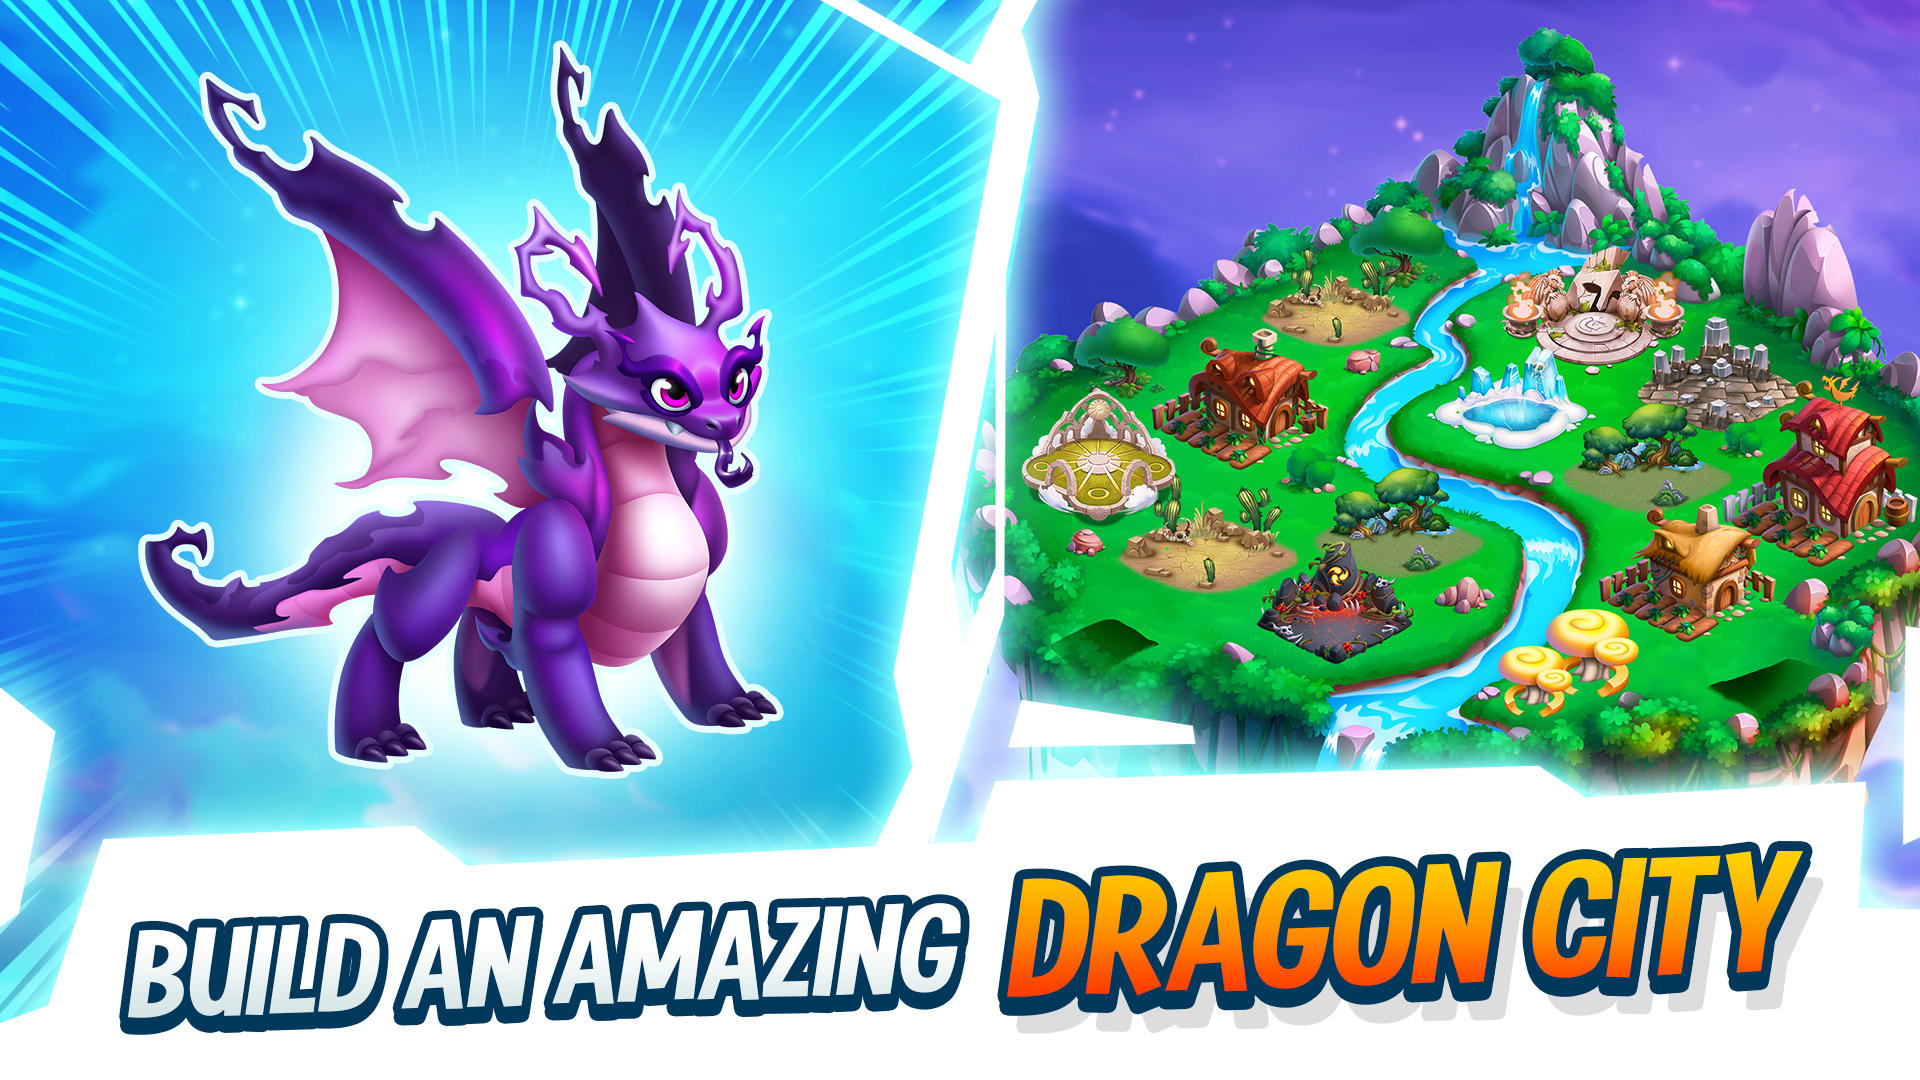 Dragon City: FREE Mythical Legendary Dragon! How To Get The